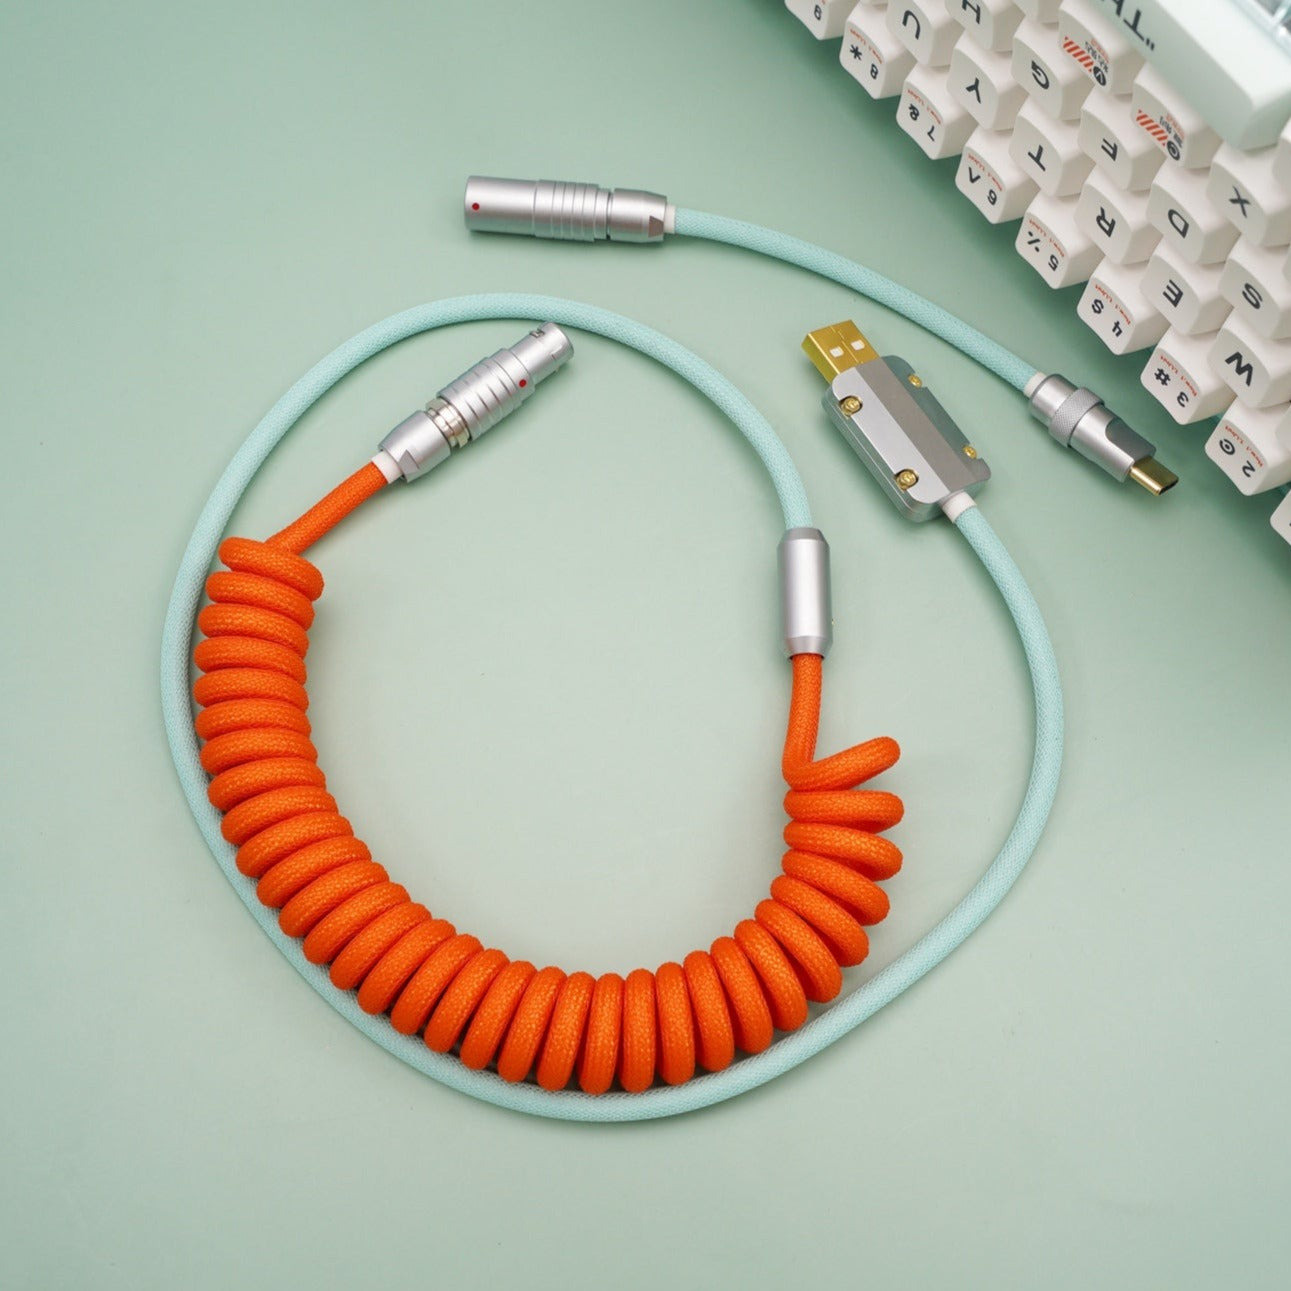 Sleeved Coiled Keyboard Aviator Cable, Lemo Style Connector - Orange/Mint